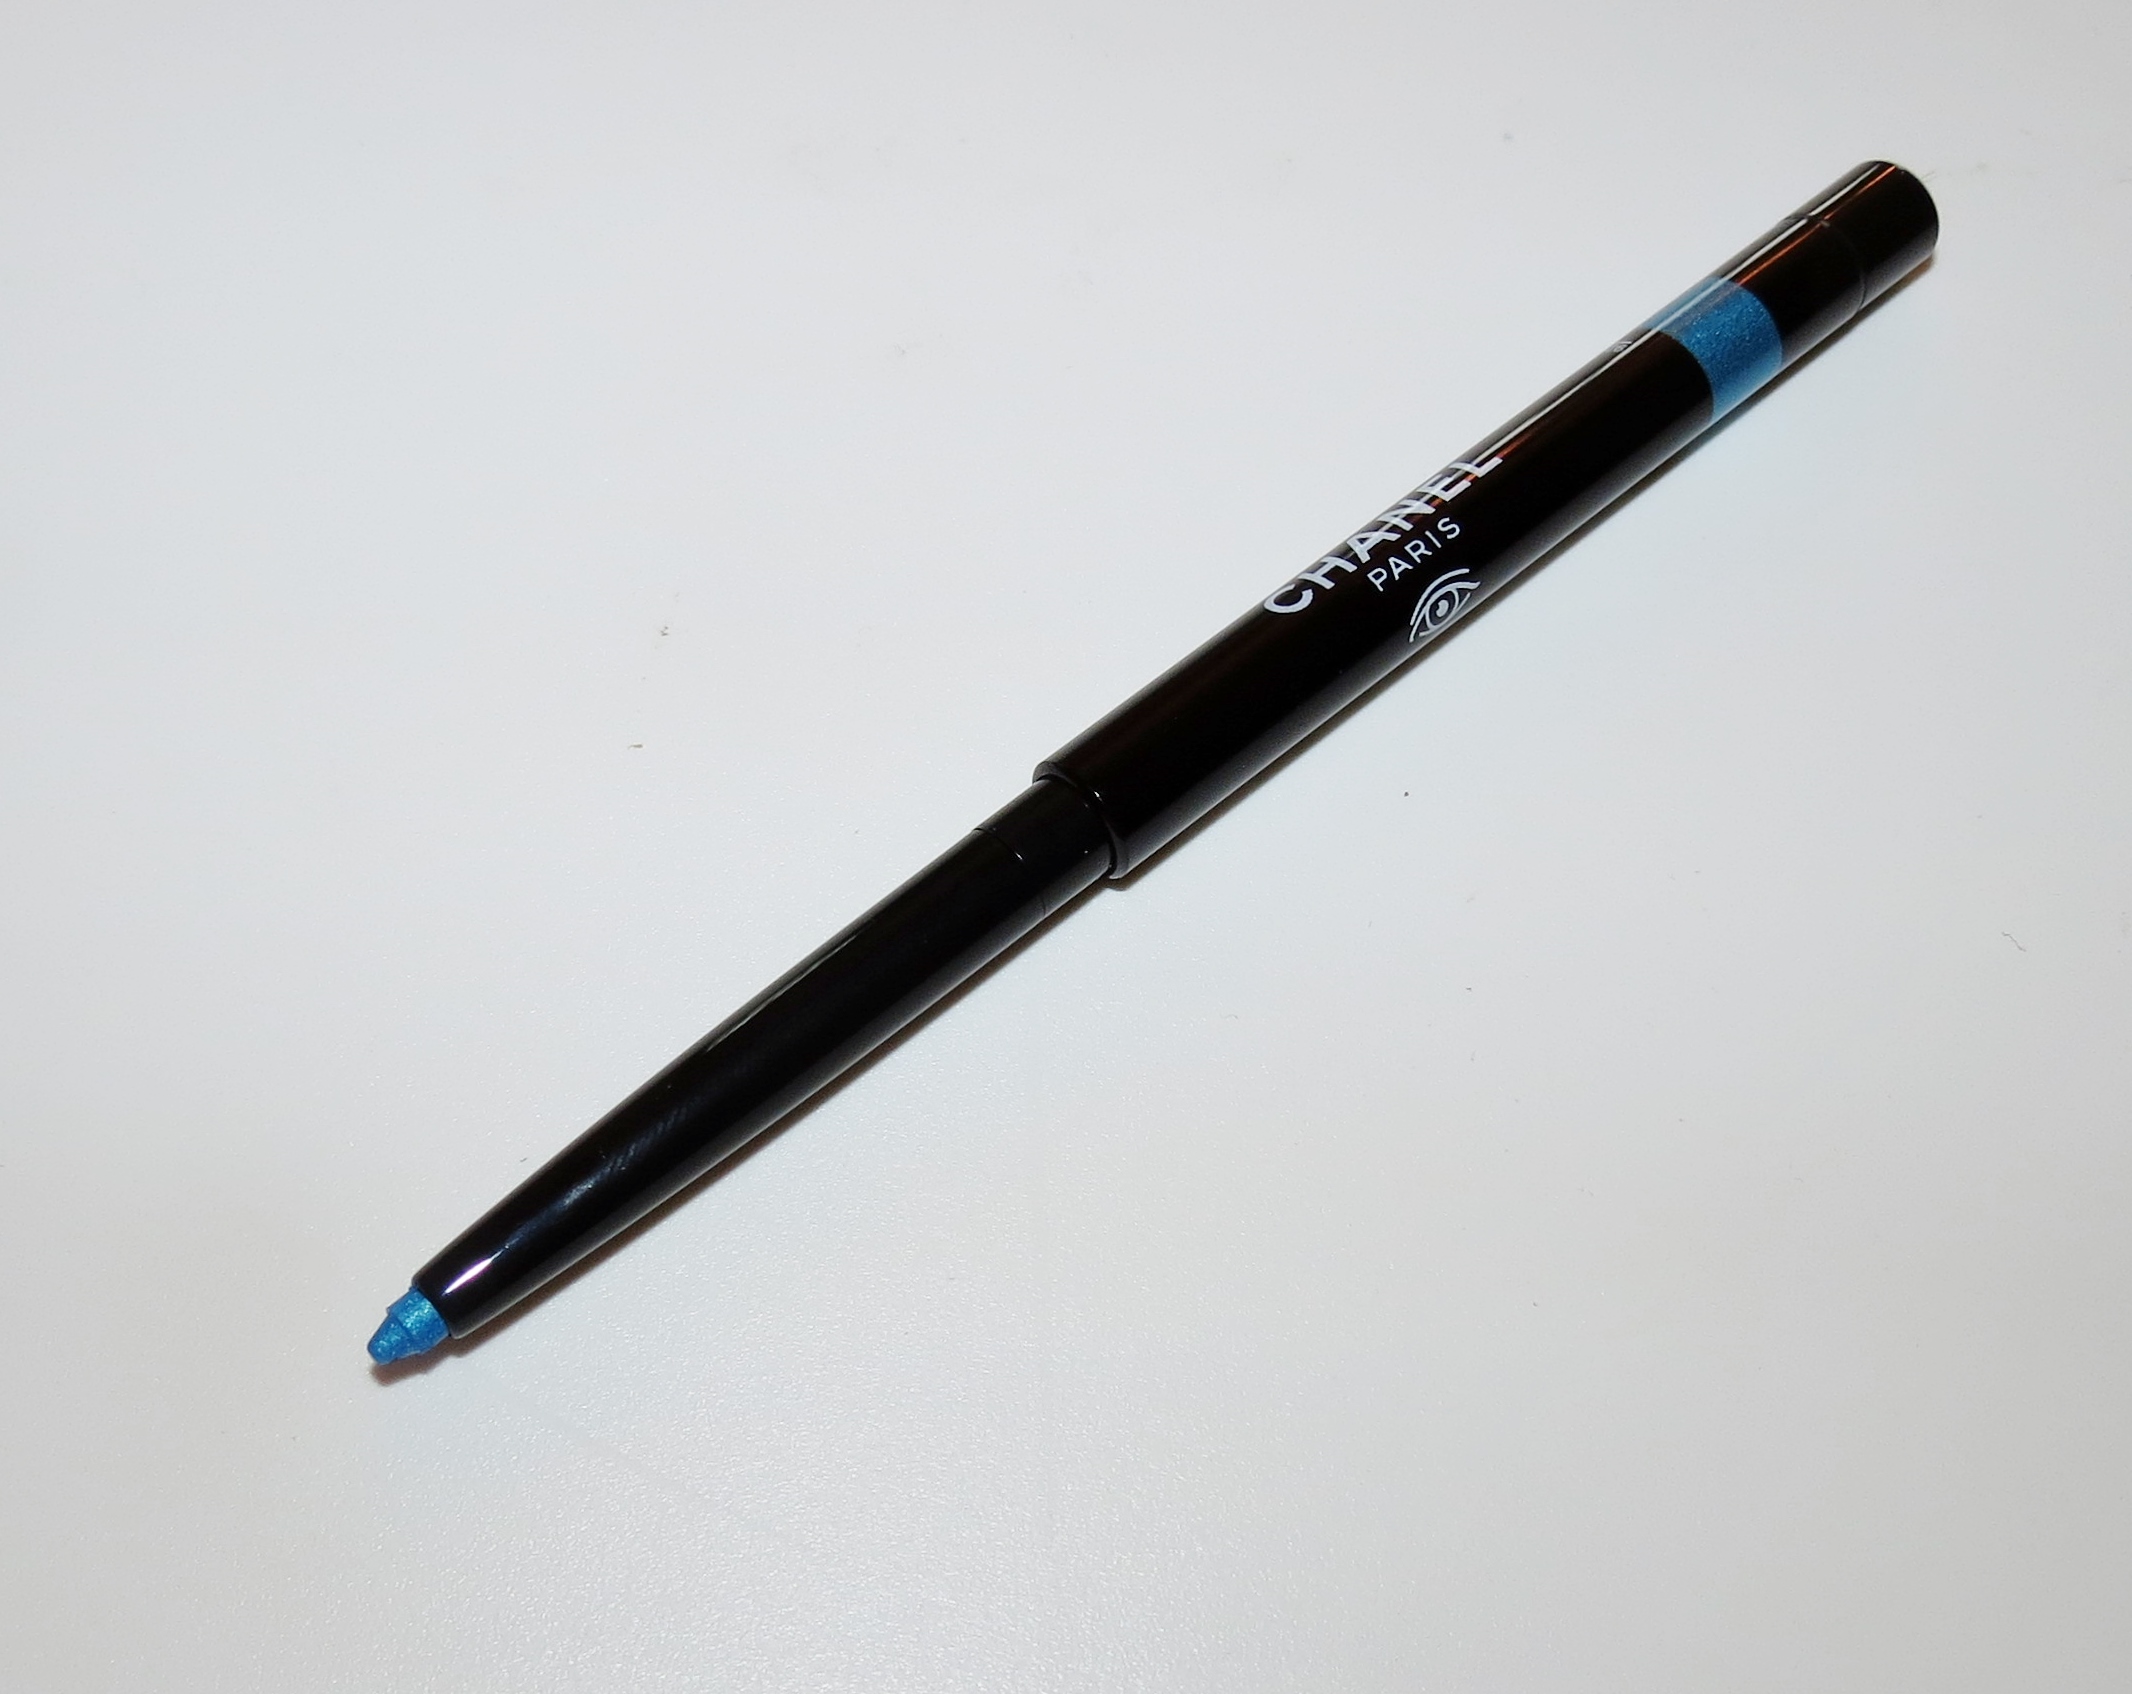 Chanel TRUE BLUE 57 Stylo Yeux Waterproof Long-Lasting Eyeliner Swatches,  Review & EOTD – L'Ete Papillon de Chanel Collection for Summer 2013 -  Blushing Noir